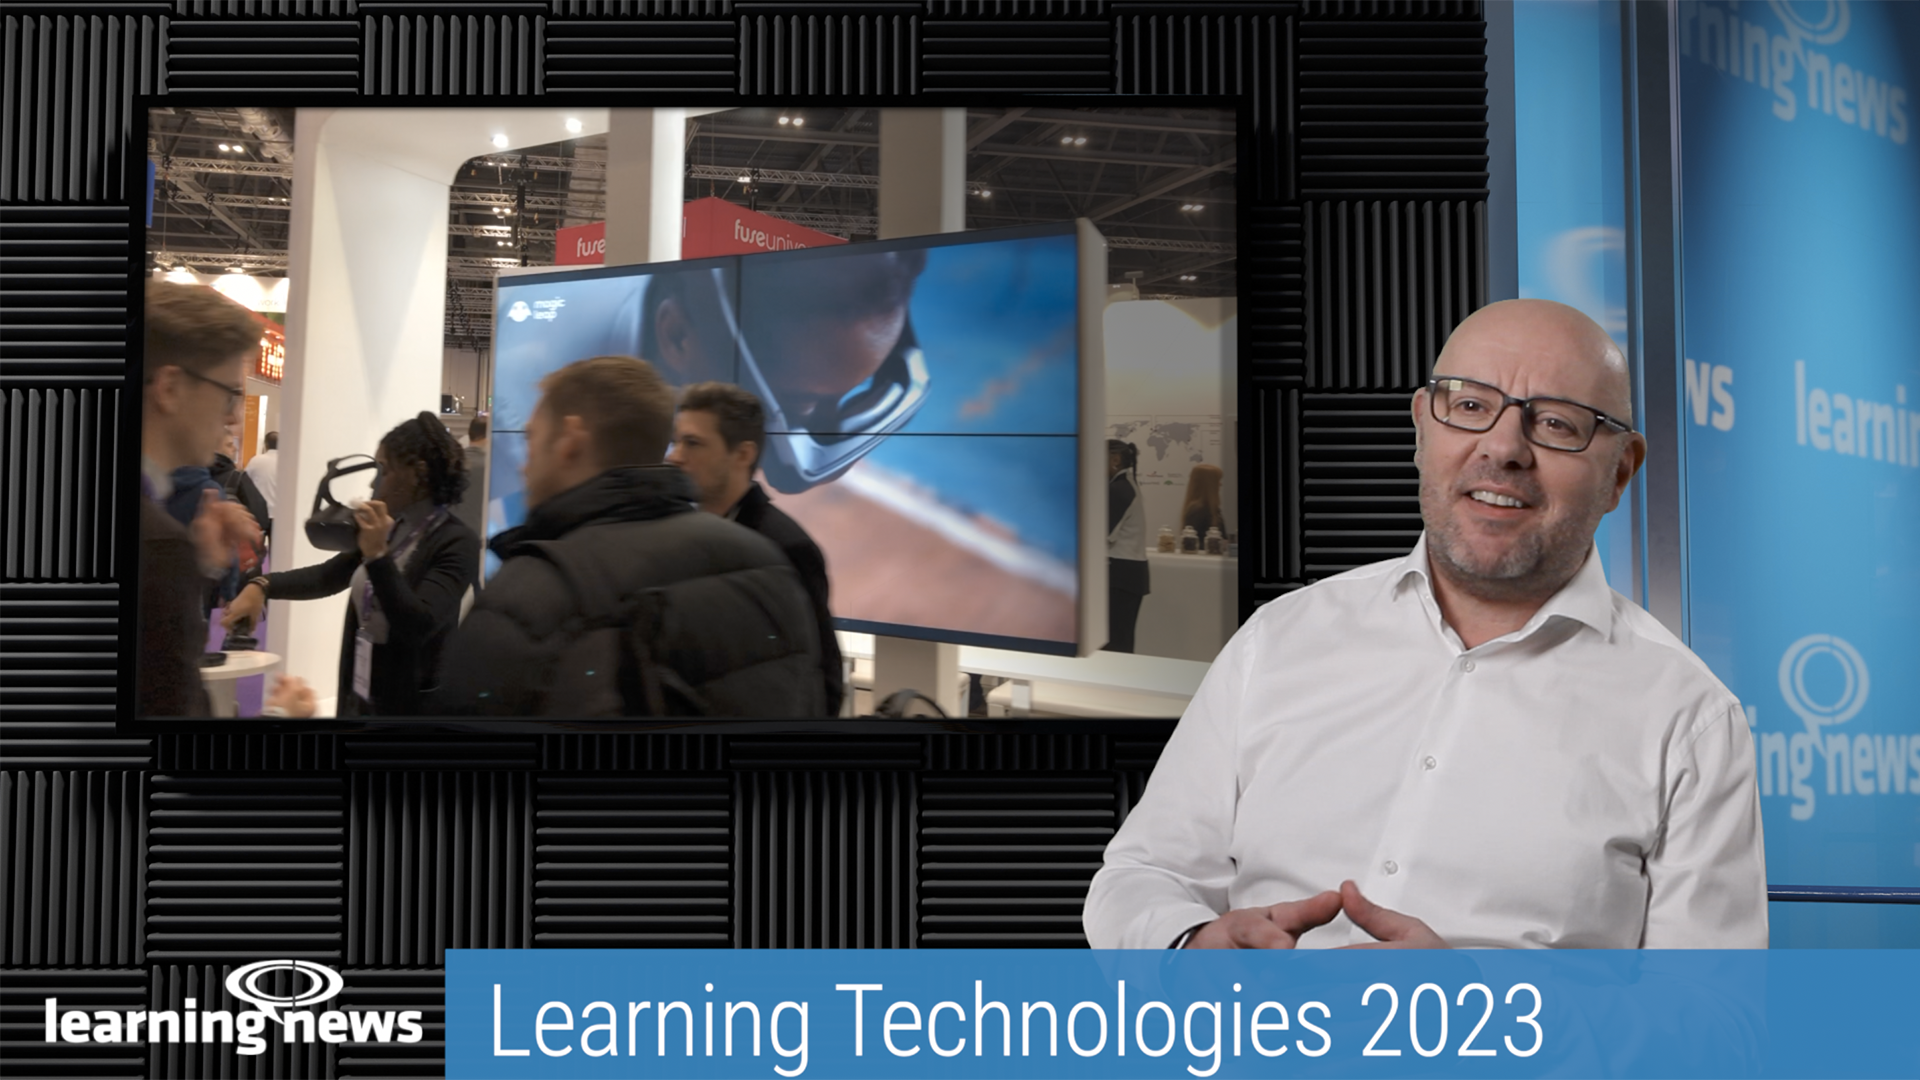 Rob Clarke looks ahead to Learning Technologies 2023 in London